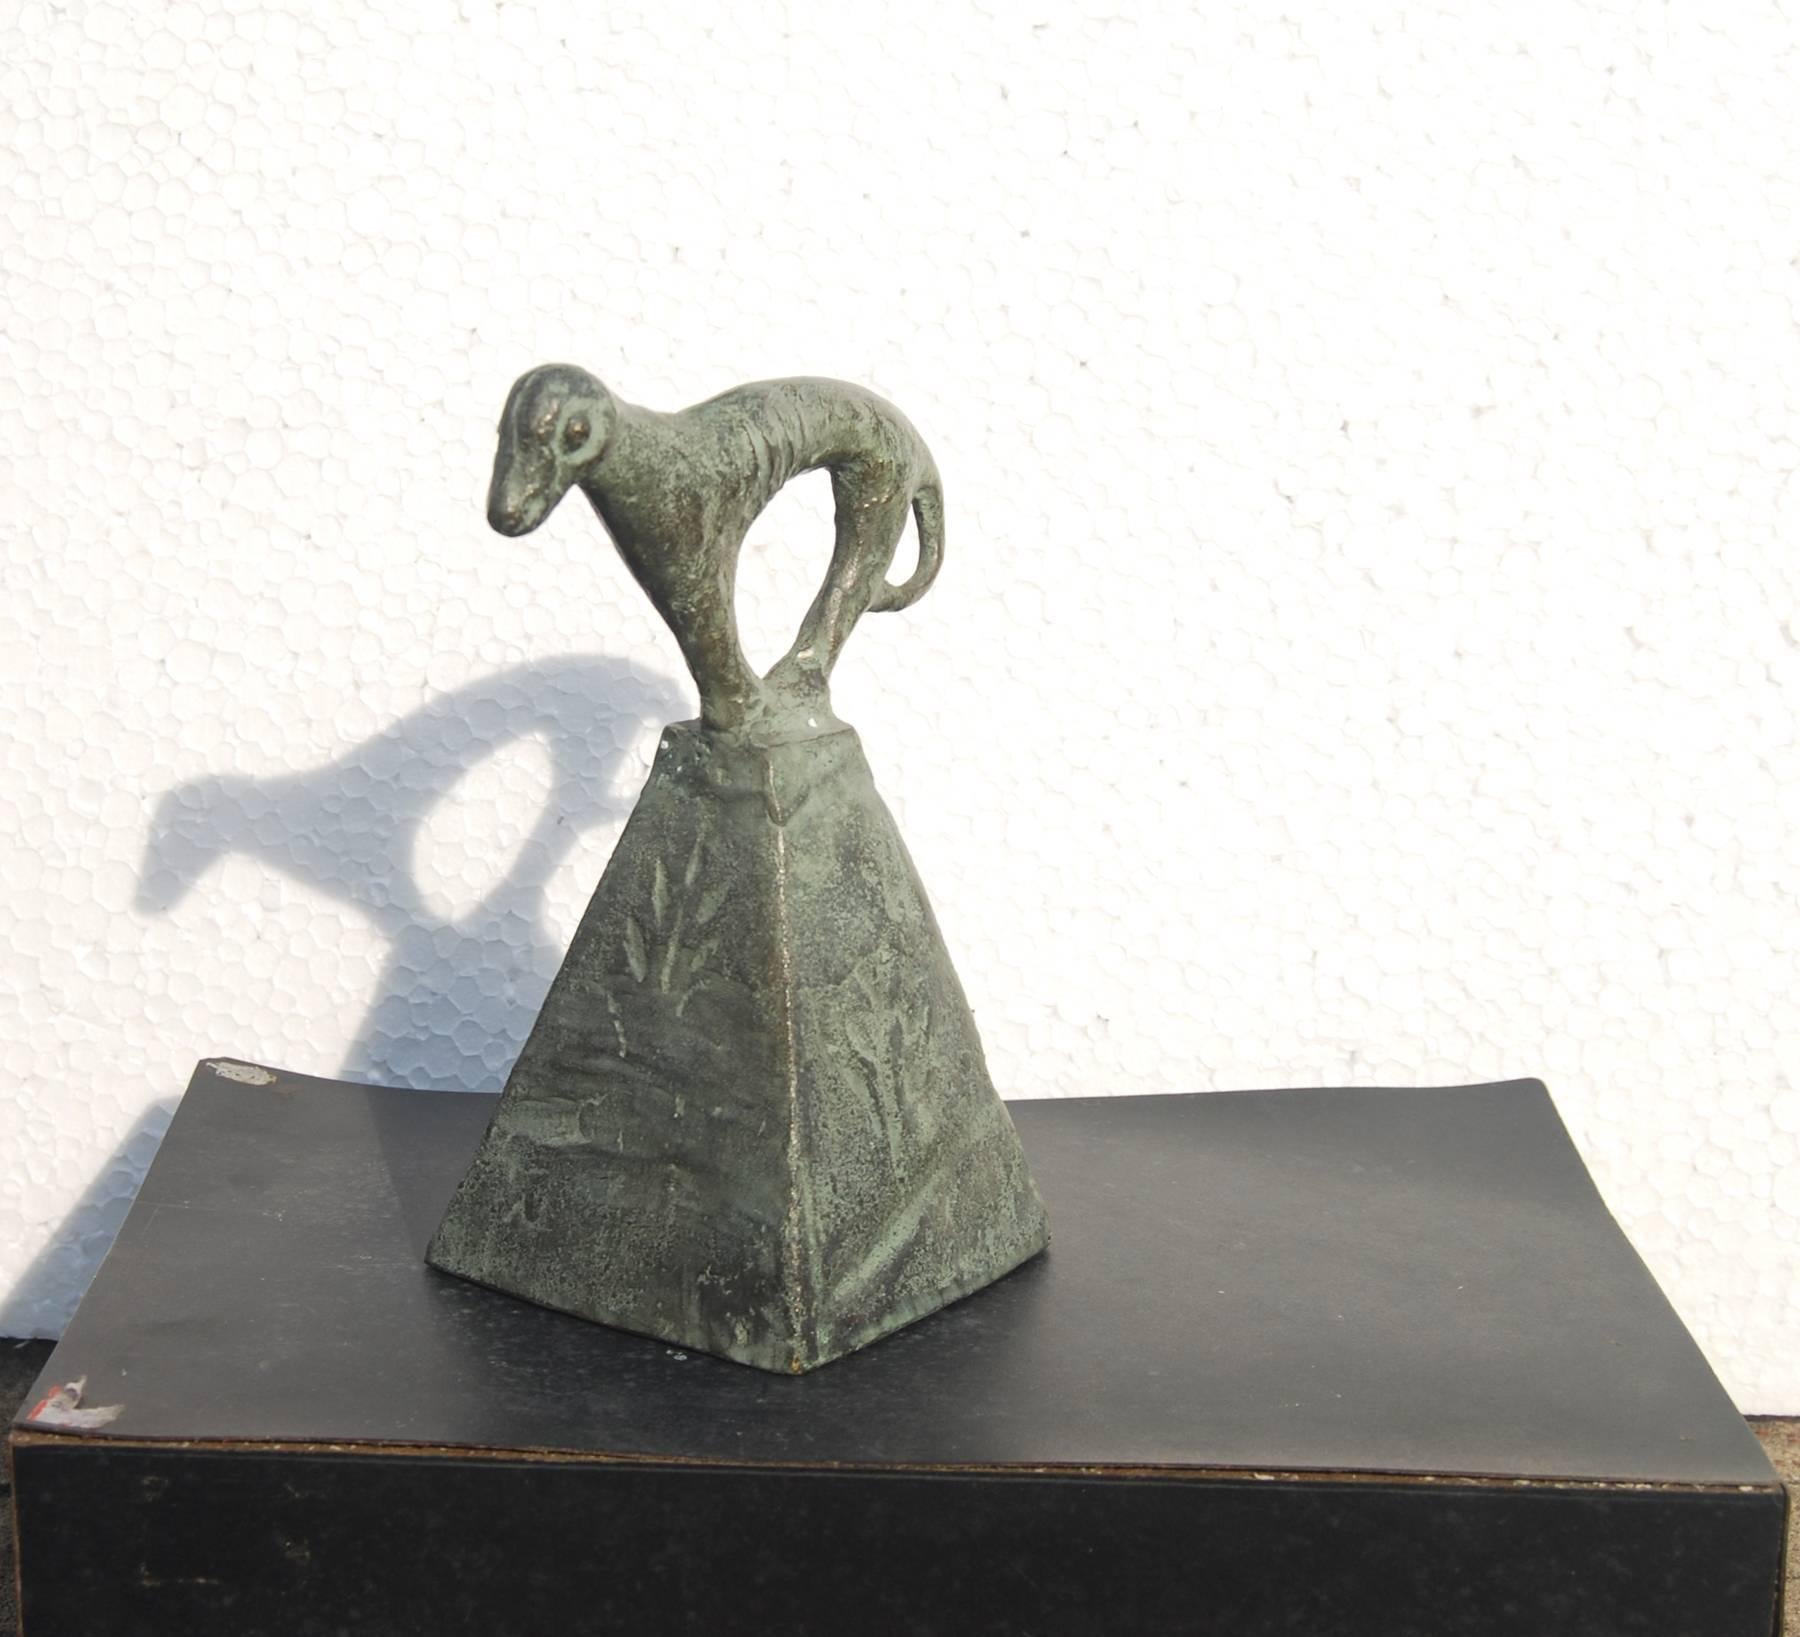 Subrata Biswas Figurative Sculpture - Dog perched on Hillock, Folk style, Motifs, Bronze, Animal Sculpture "In Stock"